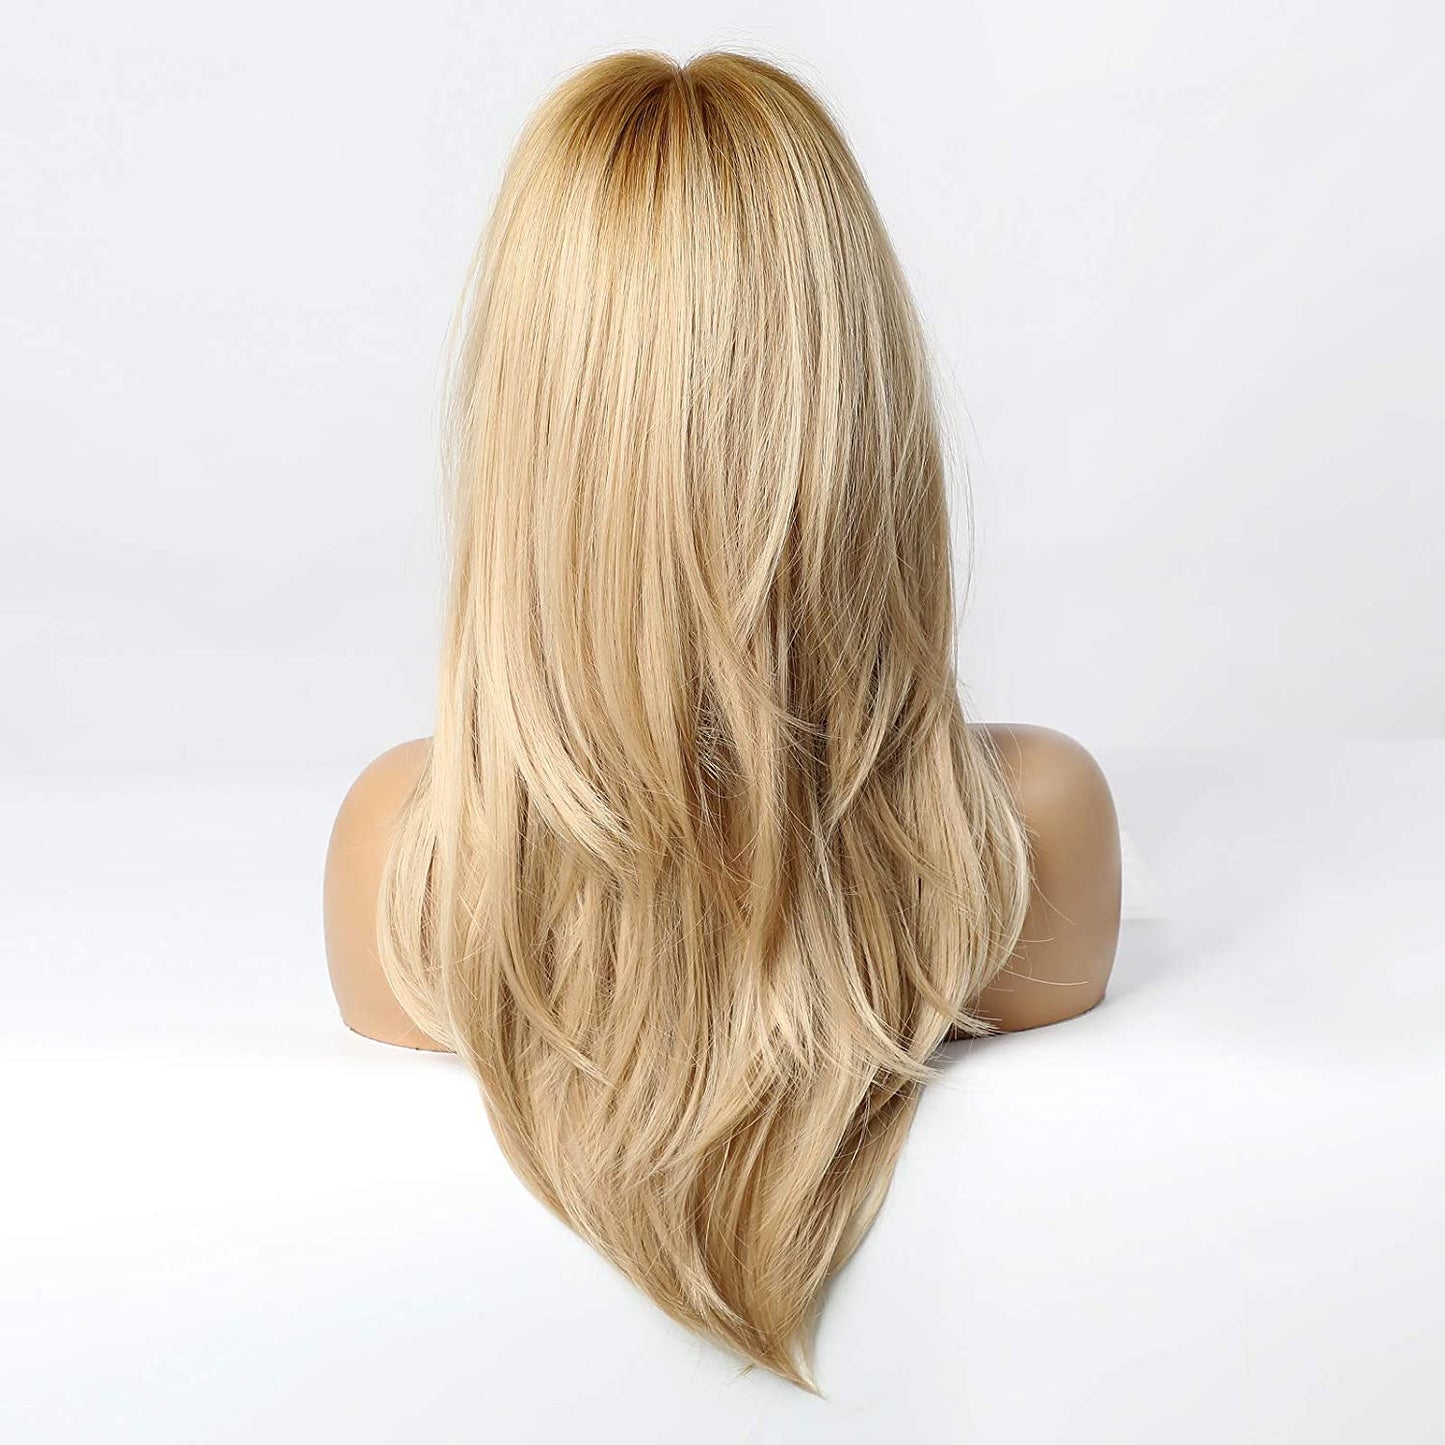 Lush Locks Synthetic Straight Blonde With Bangs Hair Wig For Women